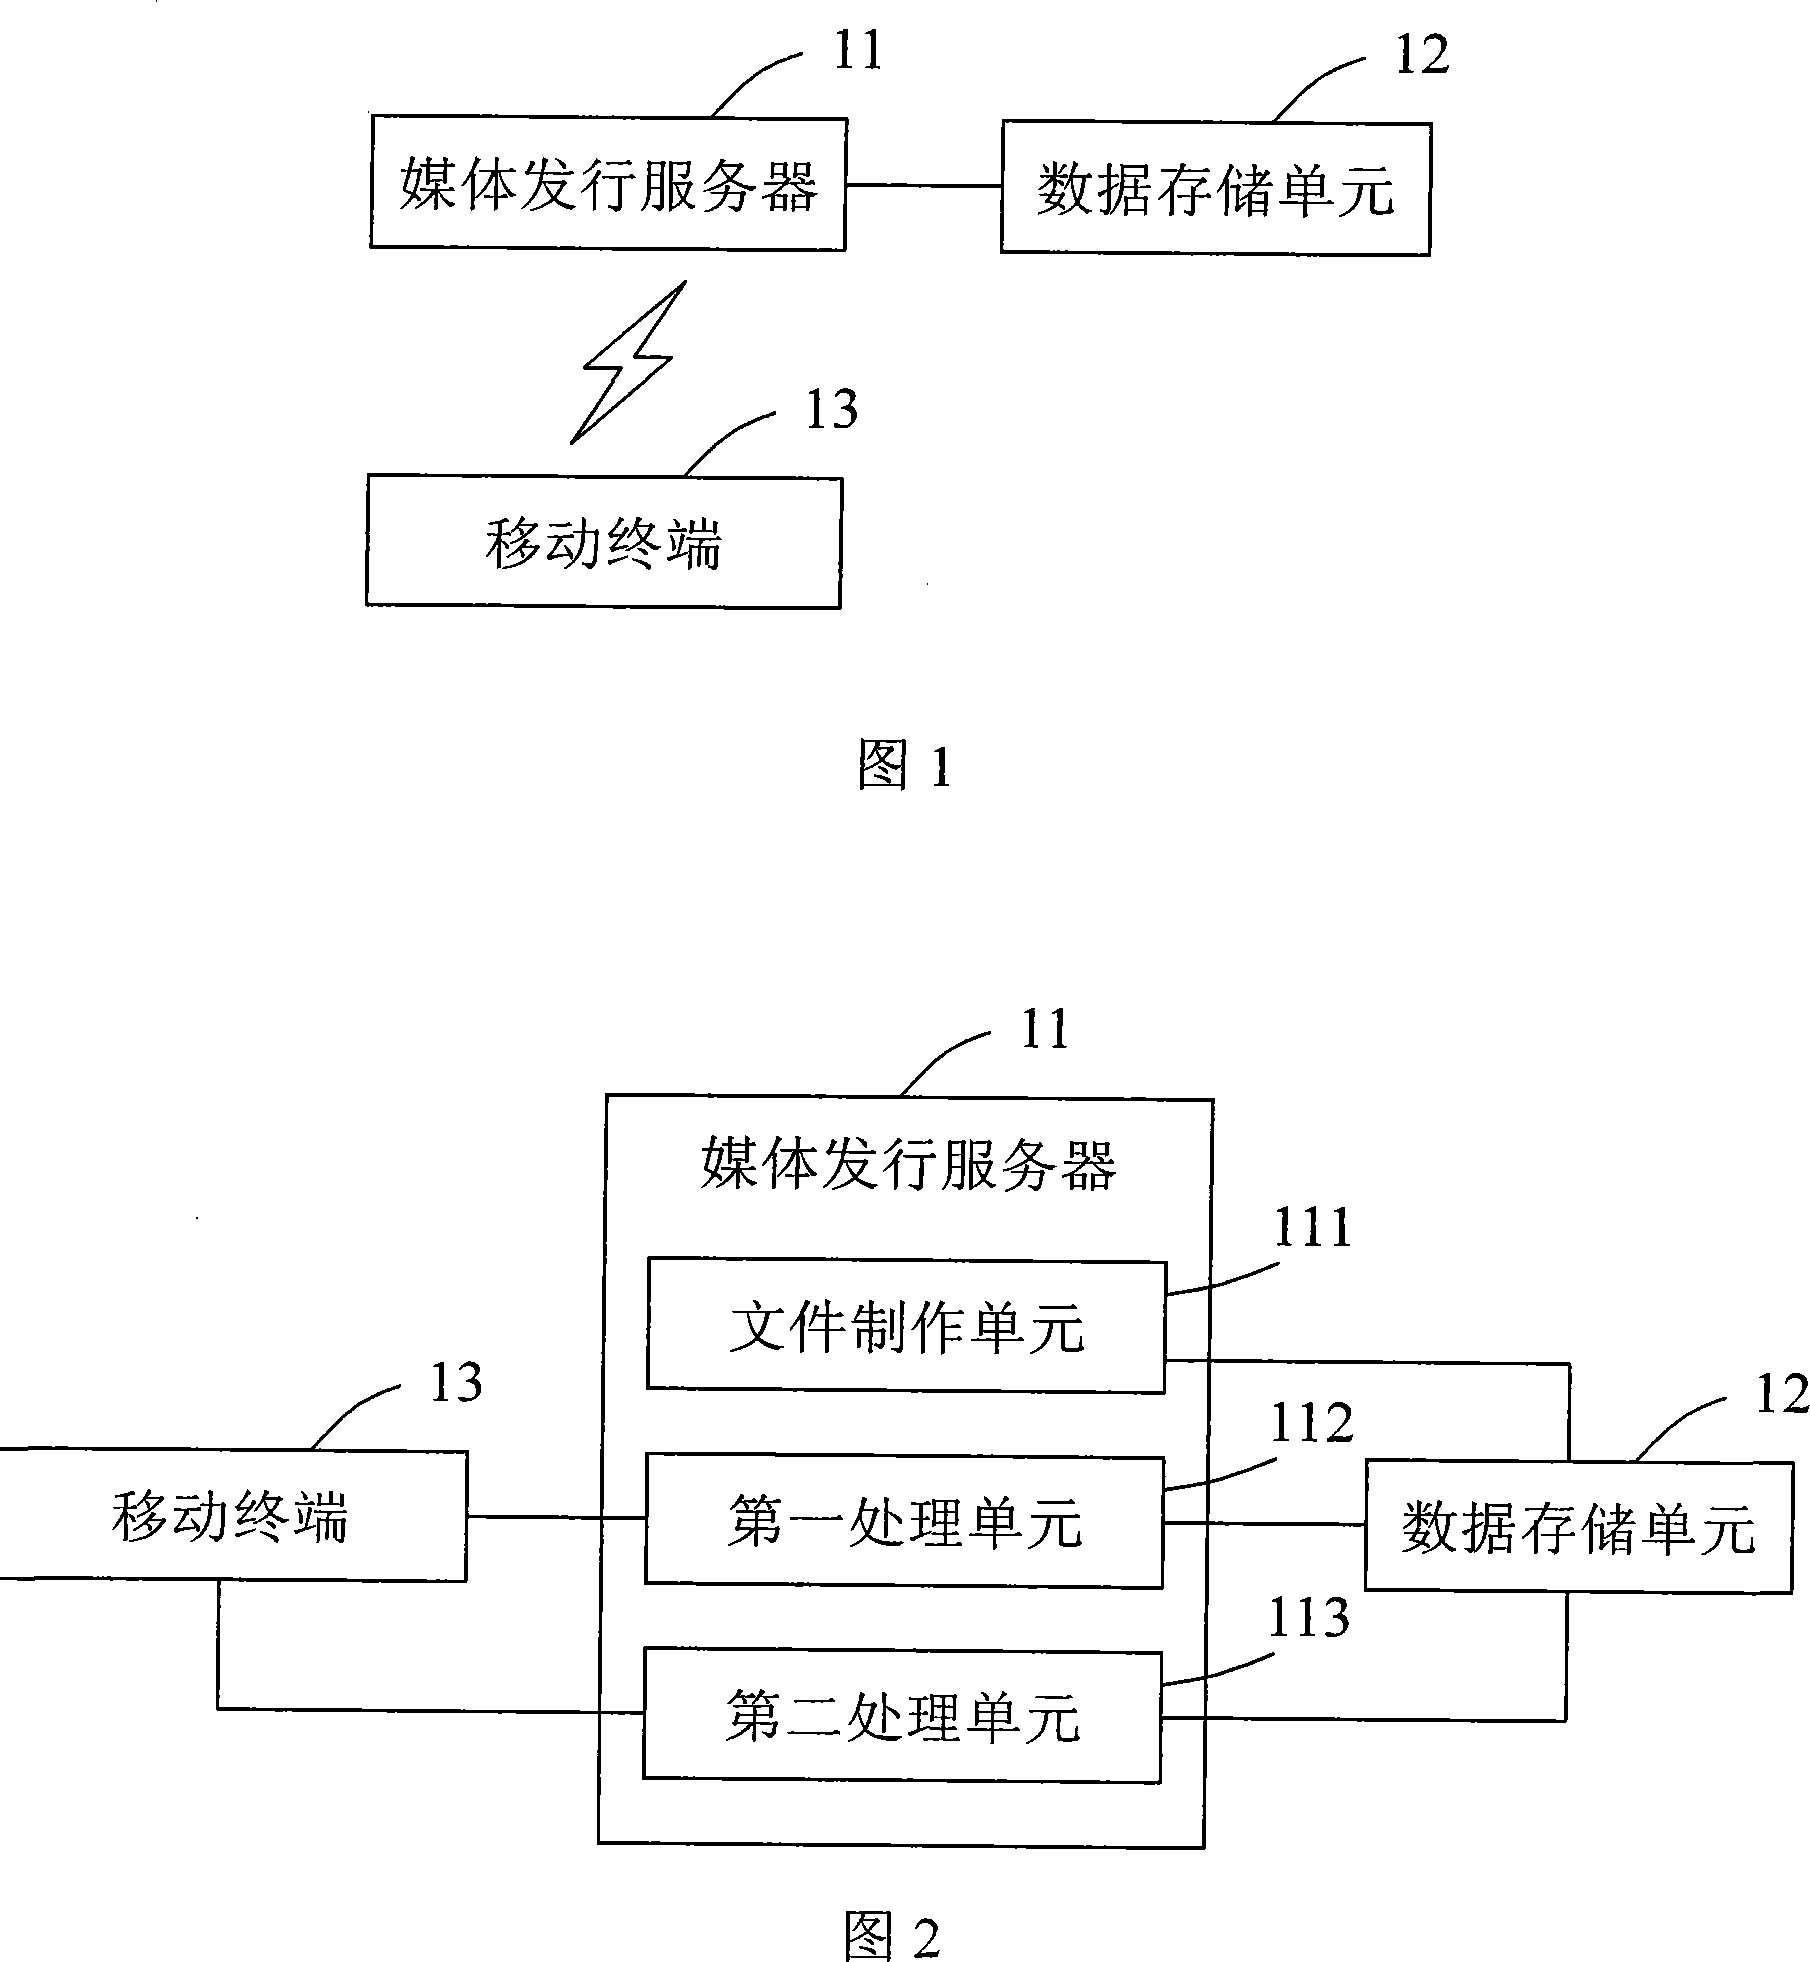 A media file transmission method, system and mobile terminal